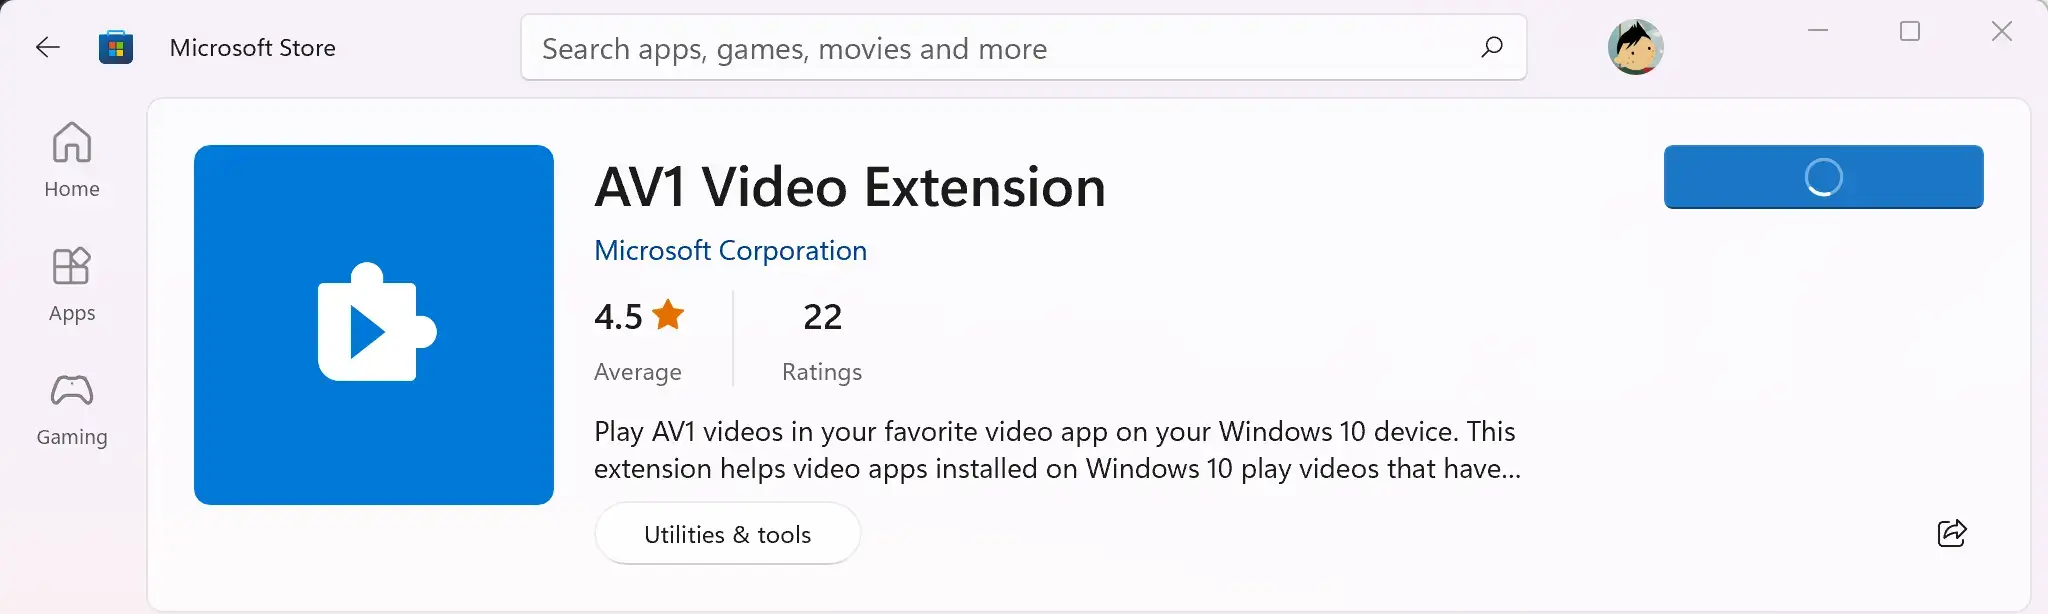 avif extension in microsoft store